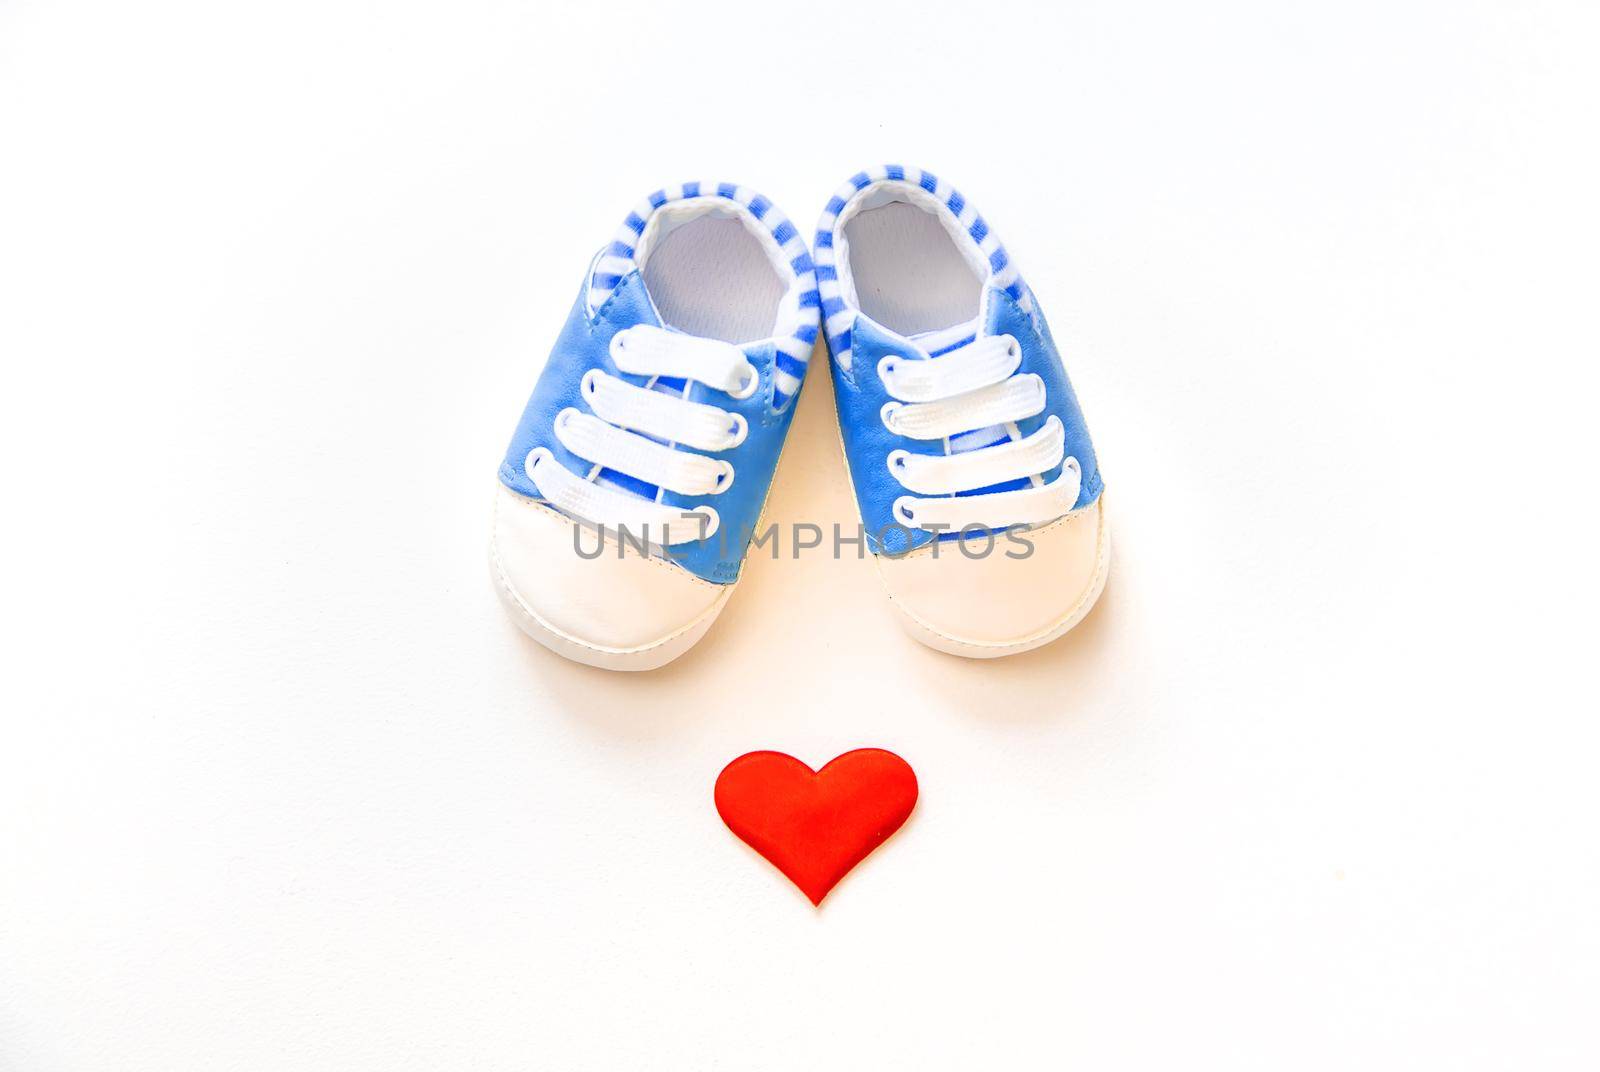 baby booties and heart isolate on a white background. Selective focus.